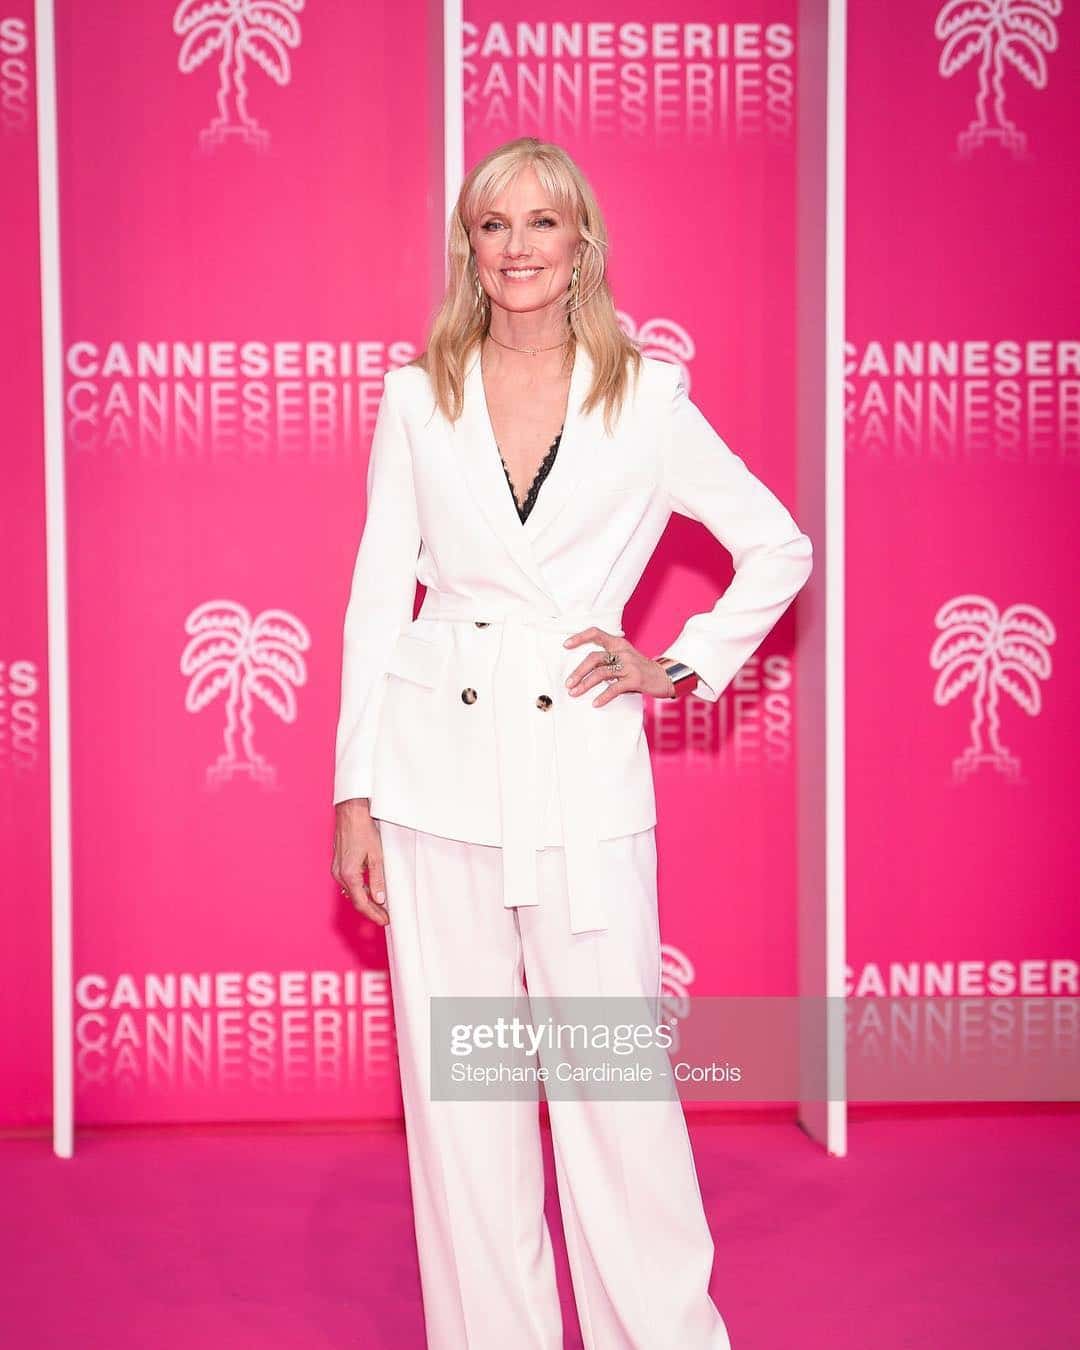 The fabulous Joely Richardson attends for the world premiere The Rook, the new series coming to @starz. 
.
Styling by @jennifer.michalski.bray.style. 
Glam by @alexisdayhmu.
.